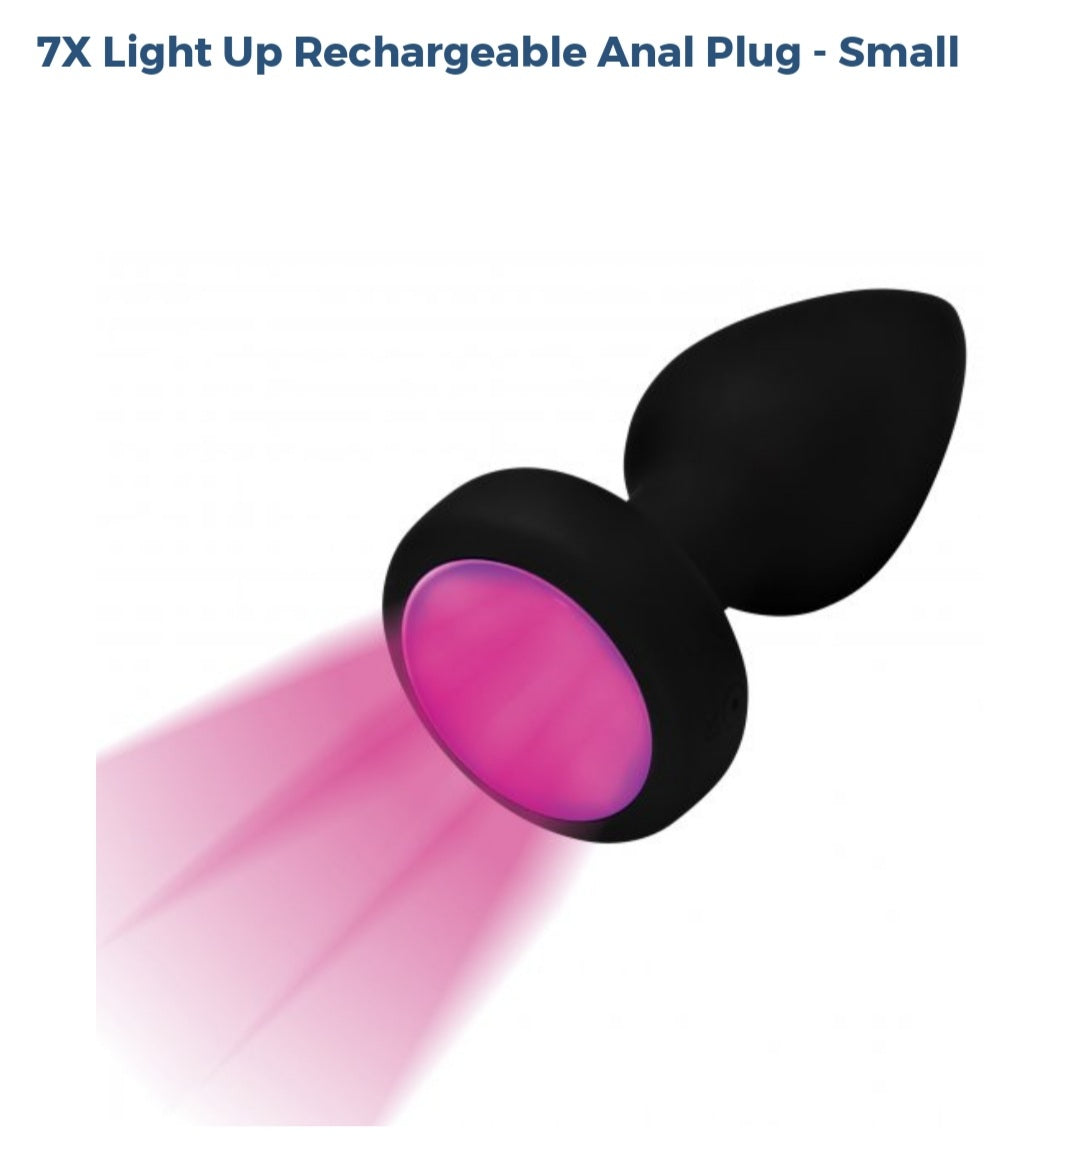 Booty Sparks 7x Light Up Rechargeable Anal Plug-Small